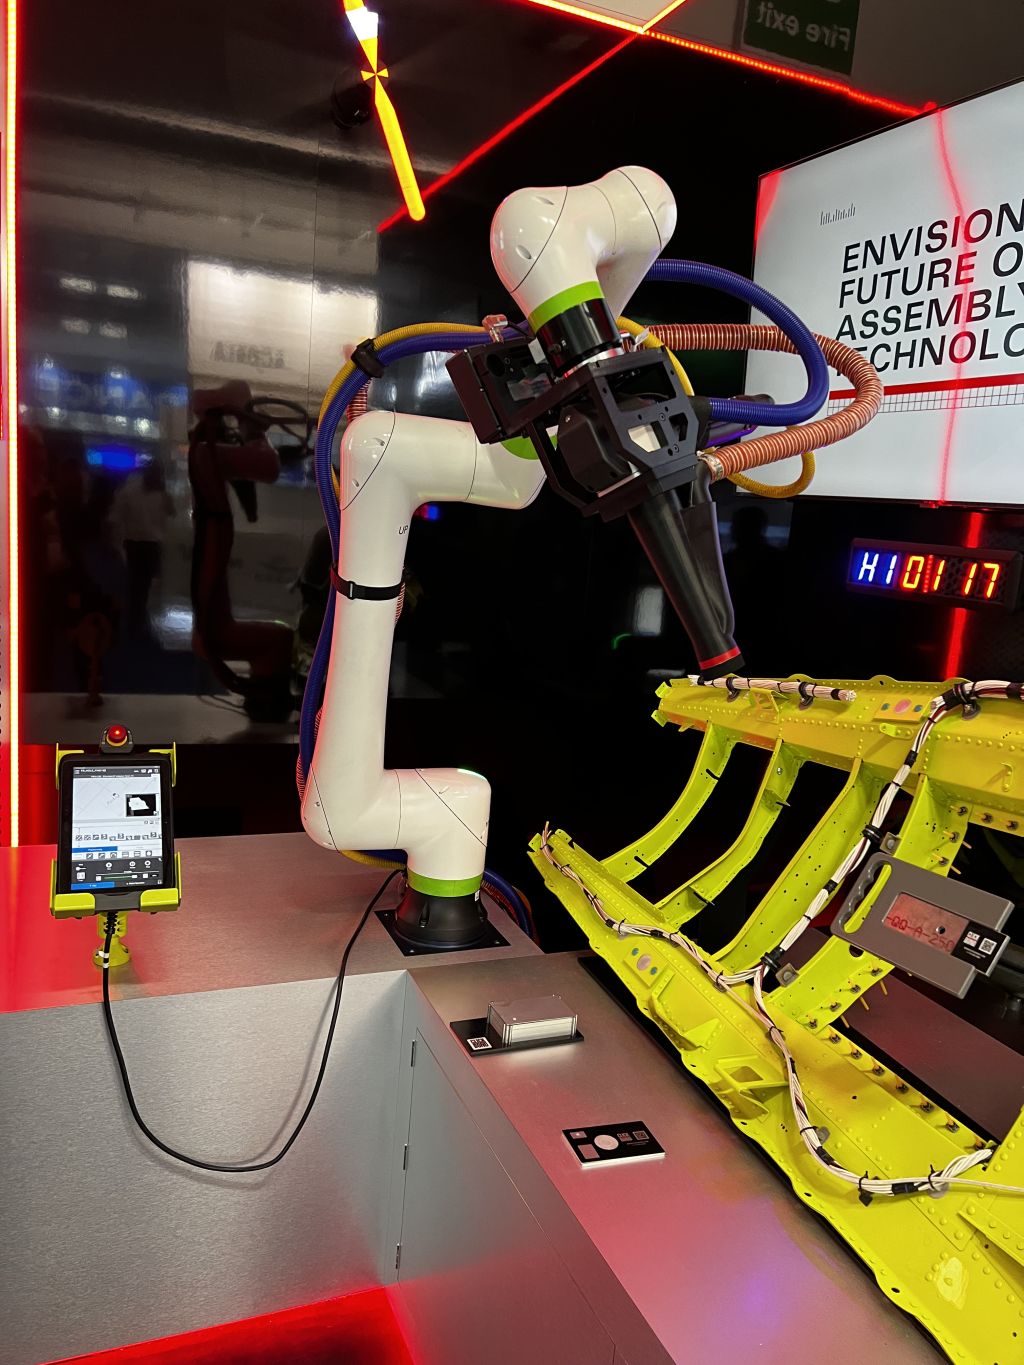 FANUC cobots allow for collaboration with workers on the shopfloor and can speed up valuable process time